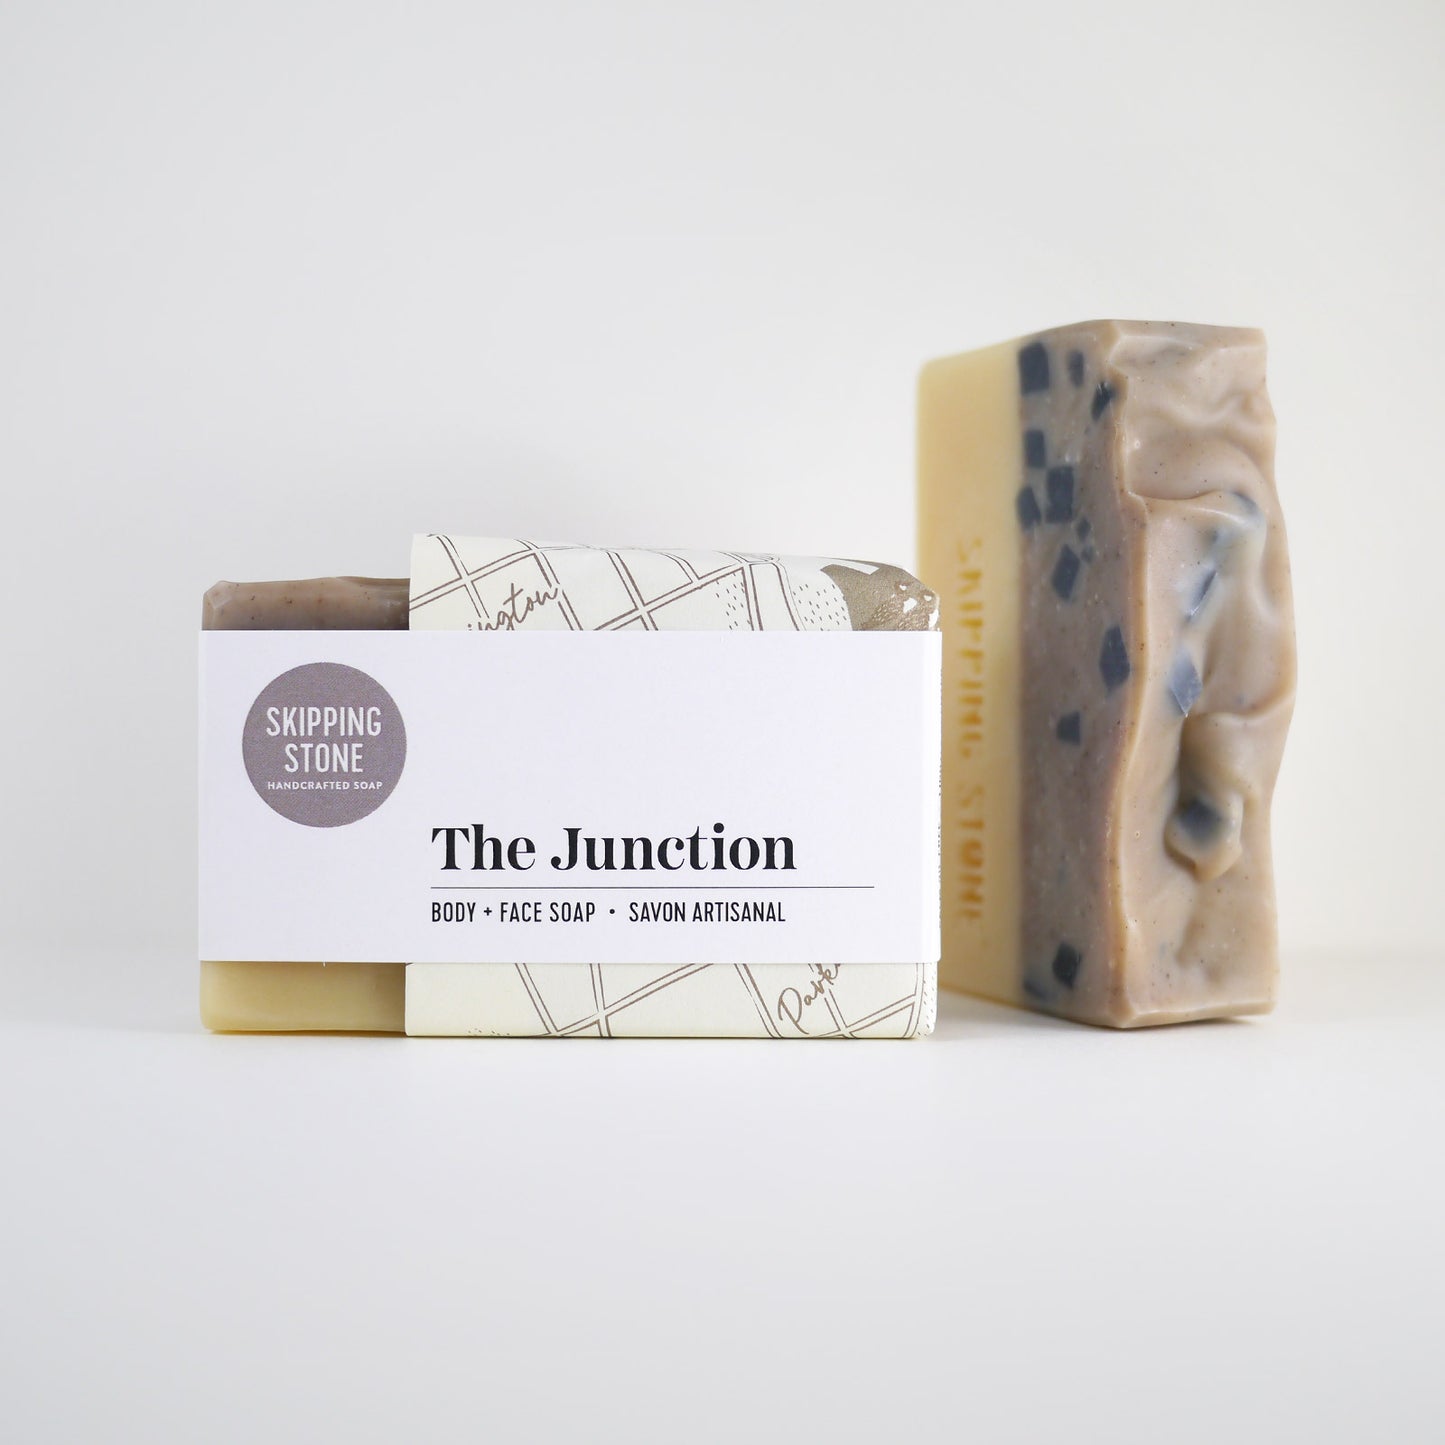 The Junction : Body + Face Soap